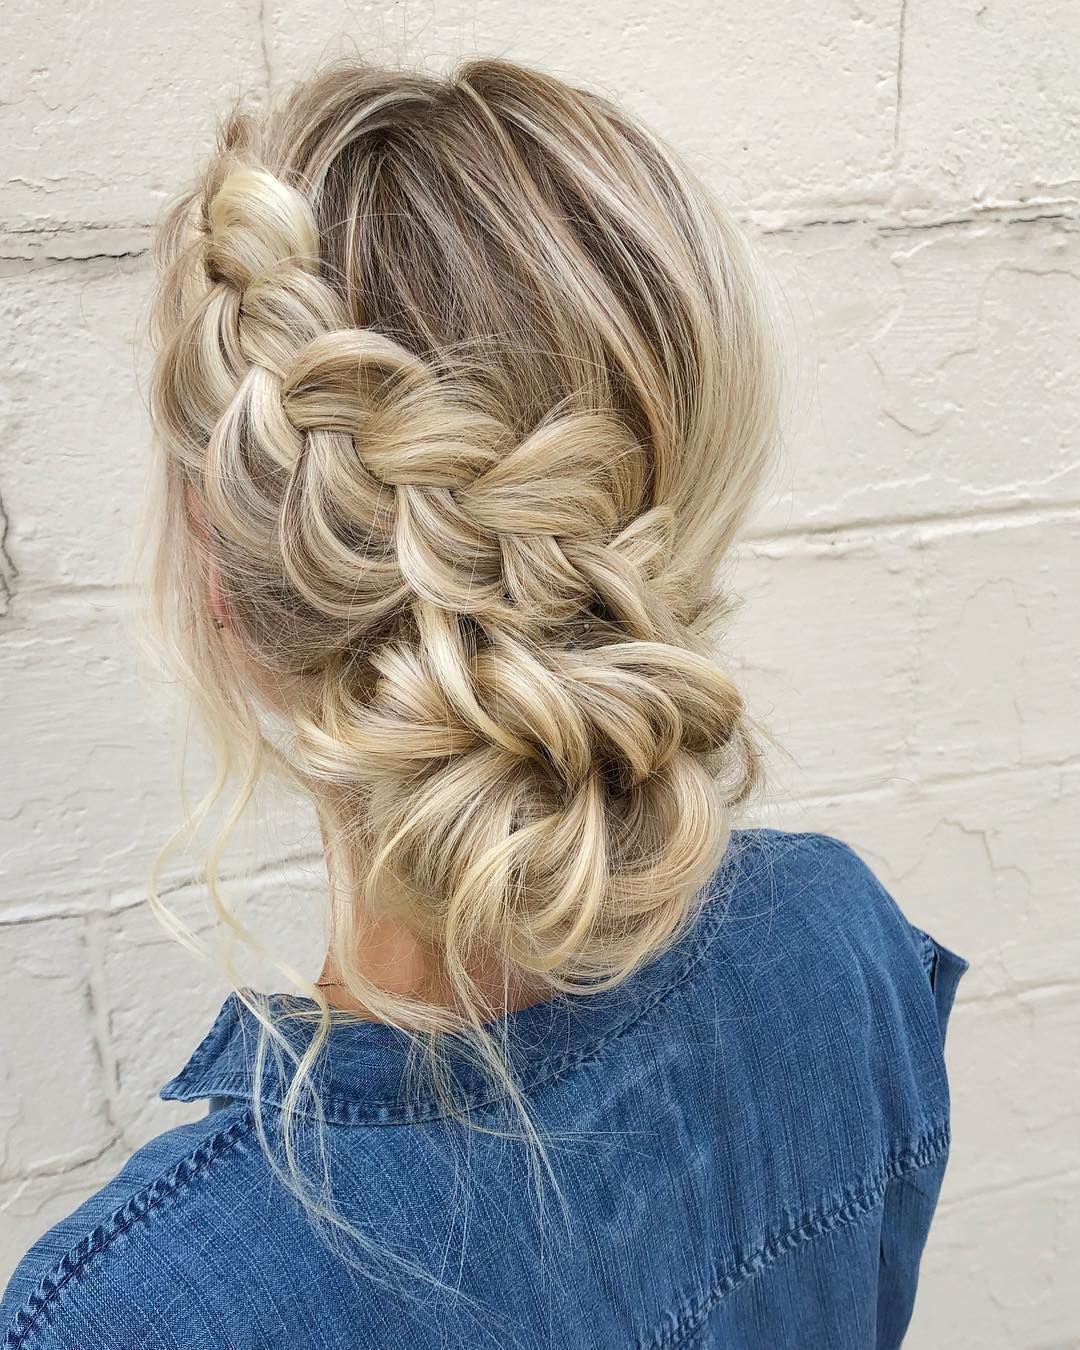 The Best Winter Hair Styles To Try This Season